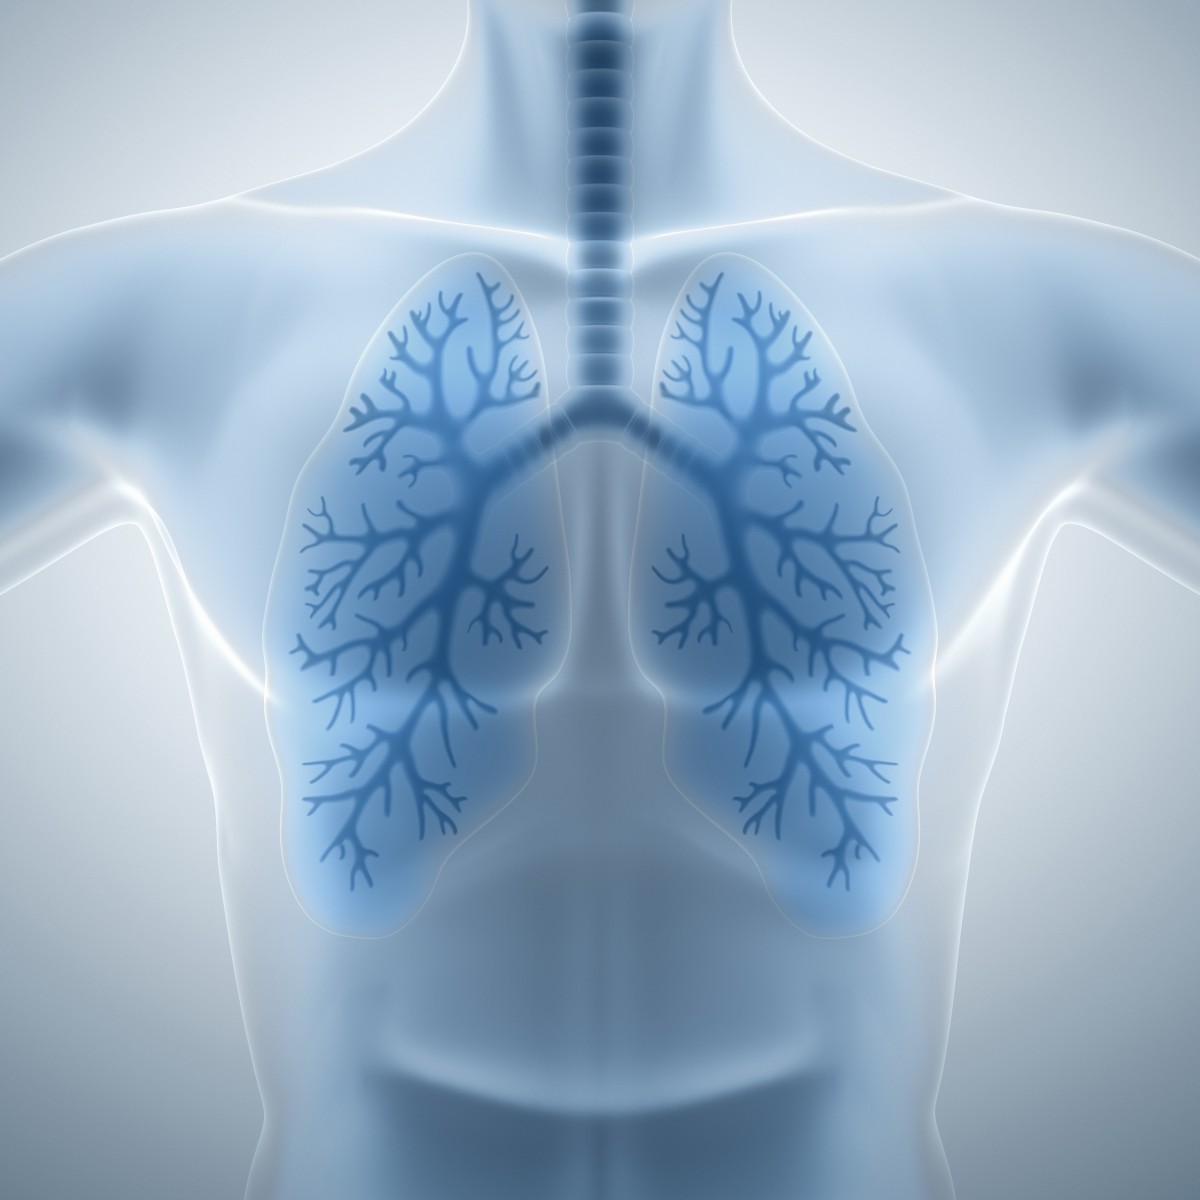 Researchers Discover New Players in the Gene Network Regulating Lung Cells and Tumorigenesis